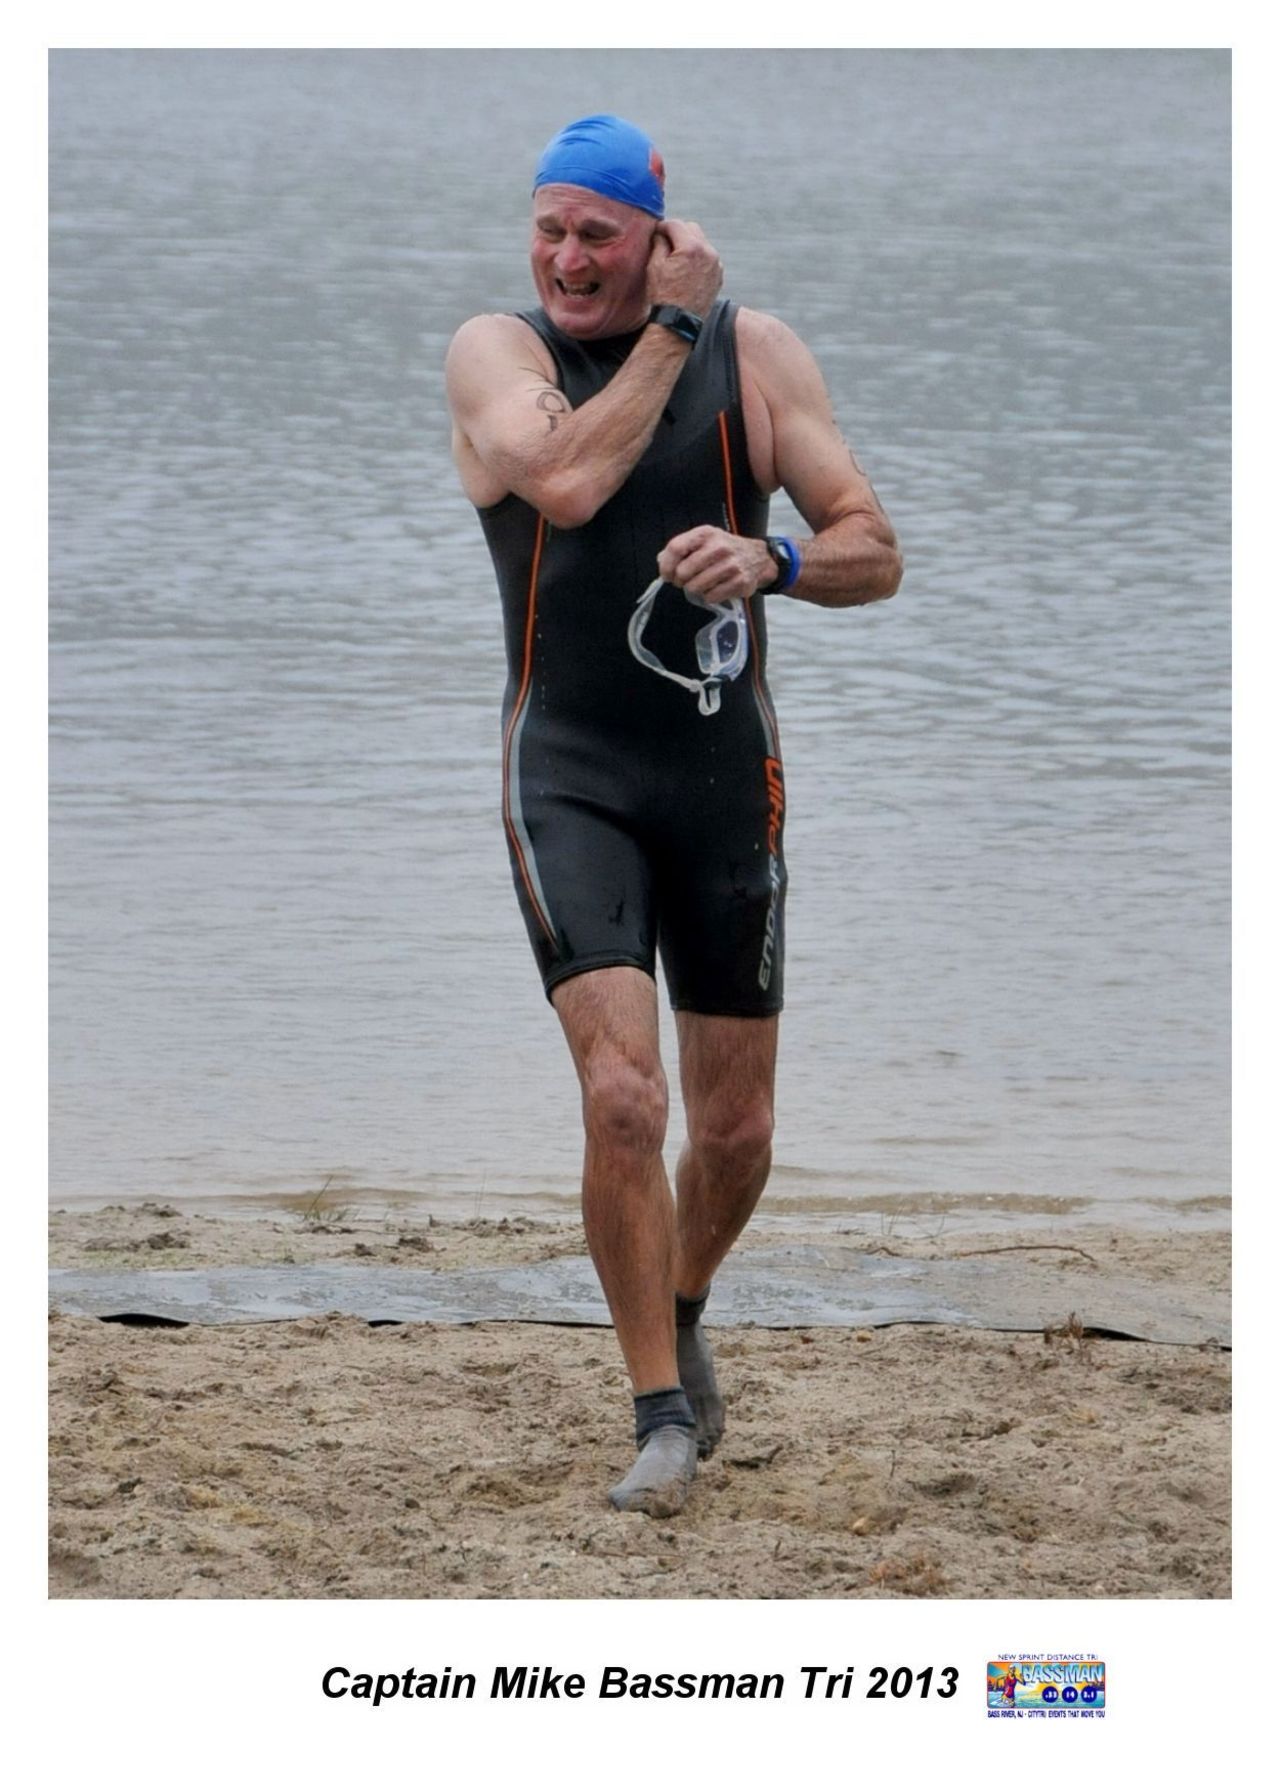 An older Mike Fitzgibbons after completing a triathlon. He remains in touch with many of his fellow sailors on the trip and fondly recalls the experiences of the open ocean.